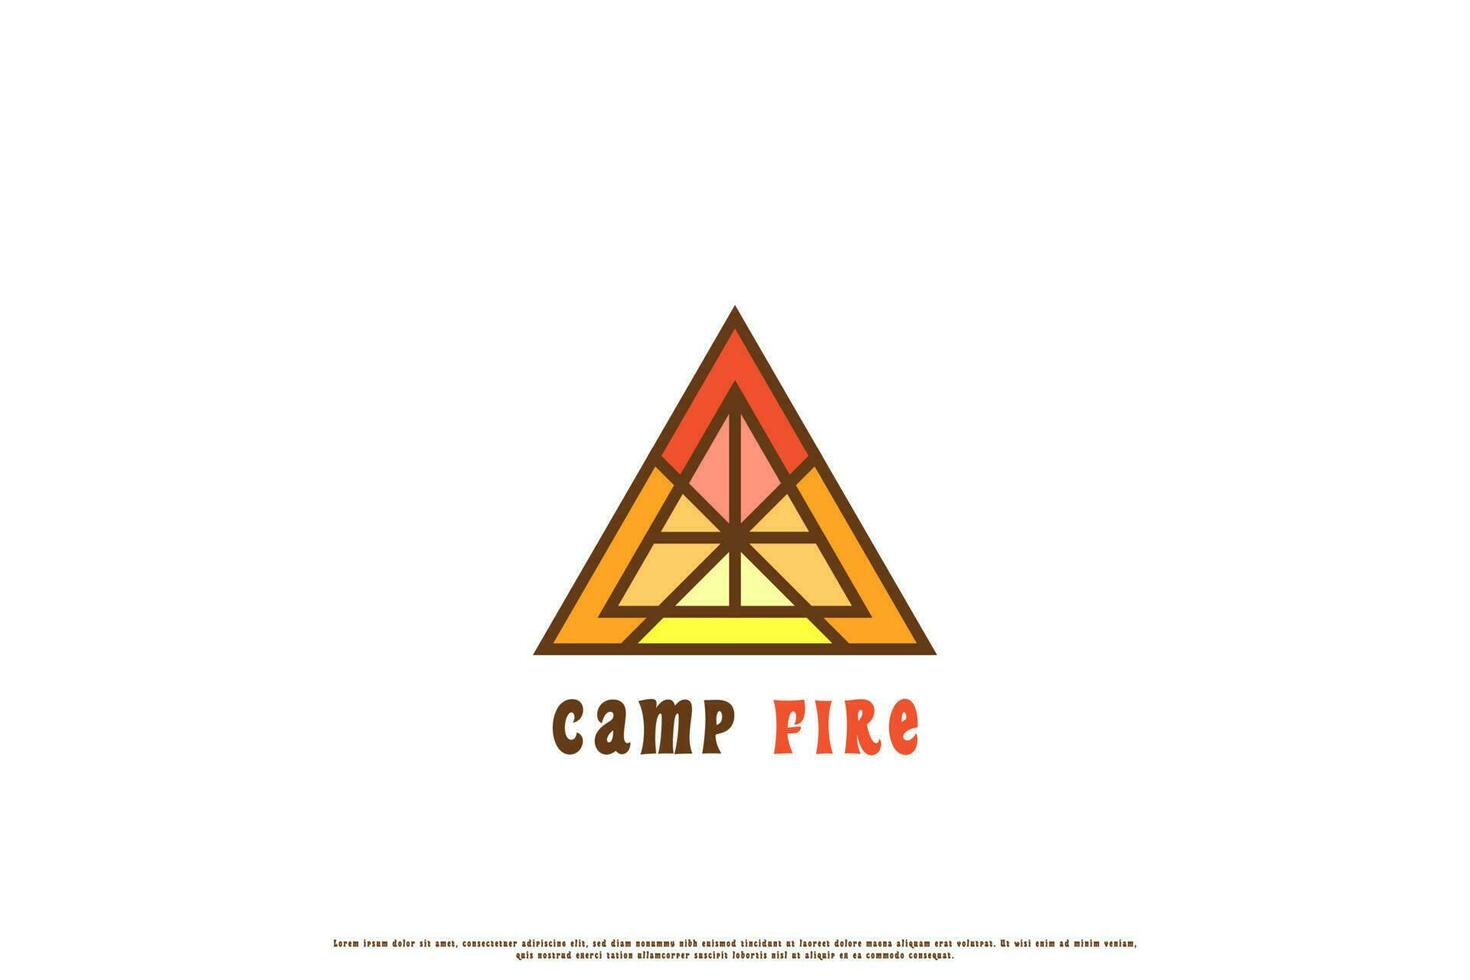 Minimalist camping fire logo design illustration. Flat fire camp triangle silhouette simple minimalist elegant abstract outdoor vacation adventure. Suitable for travel holiday companies. vector